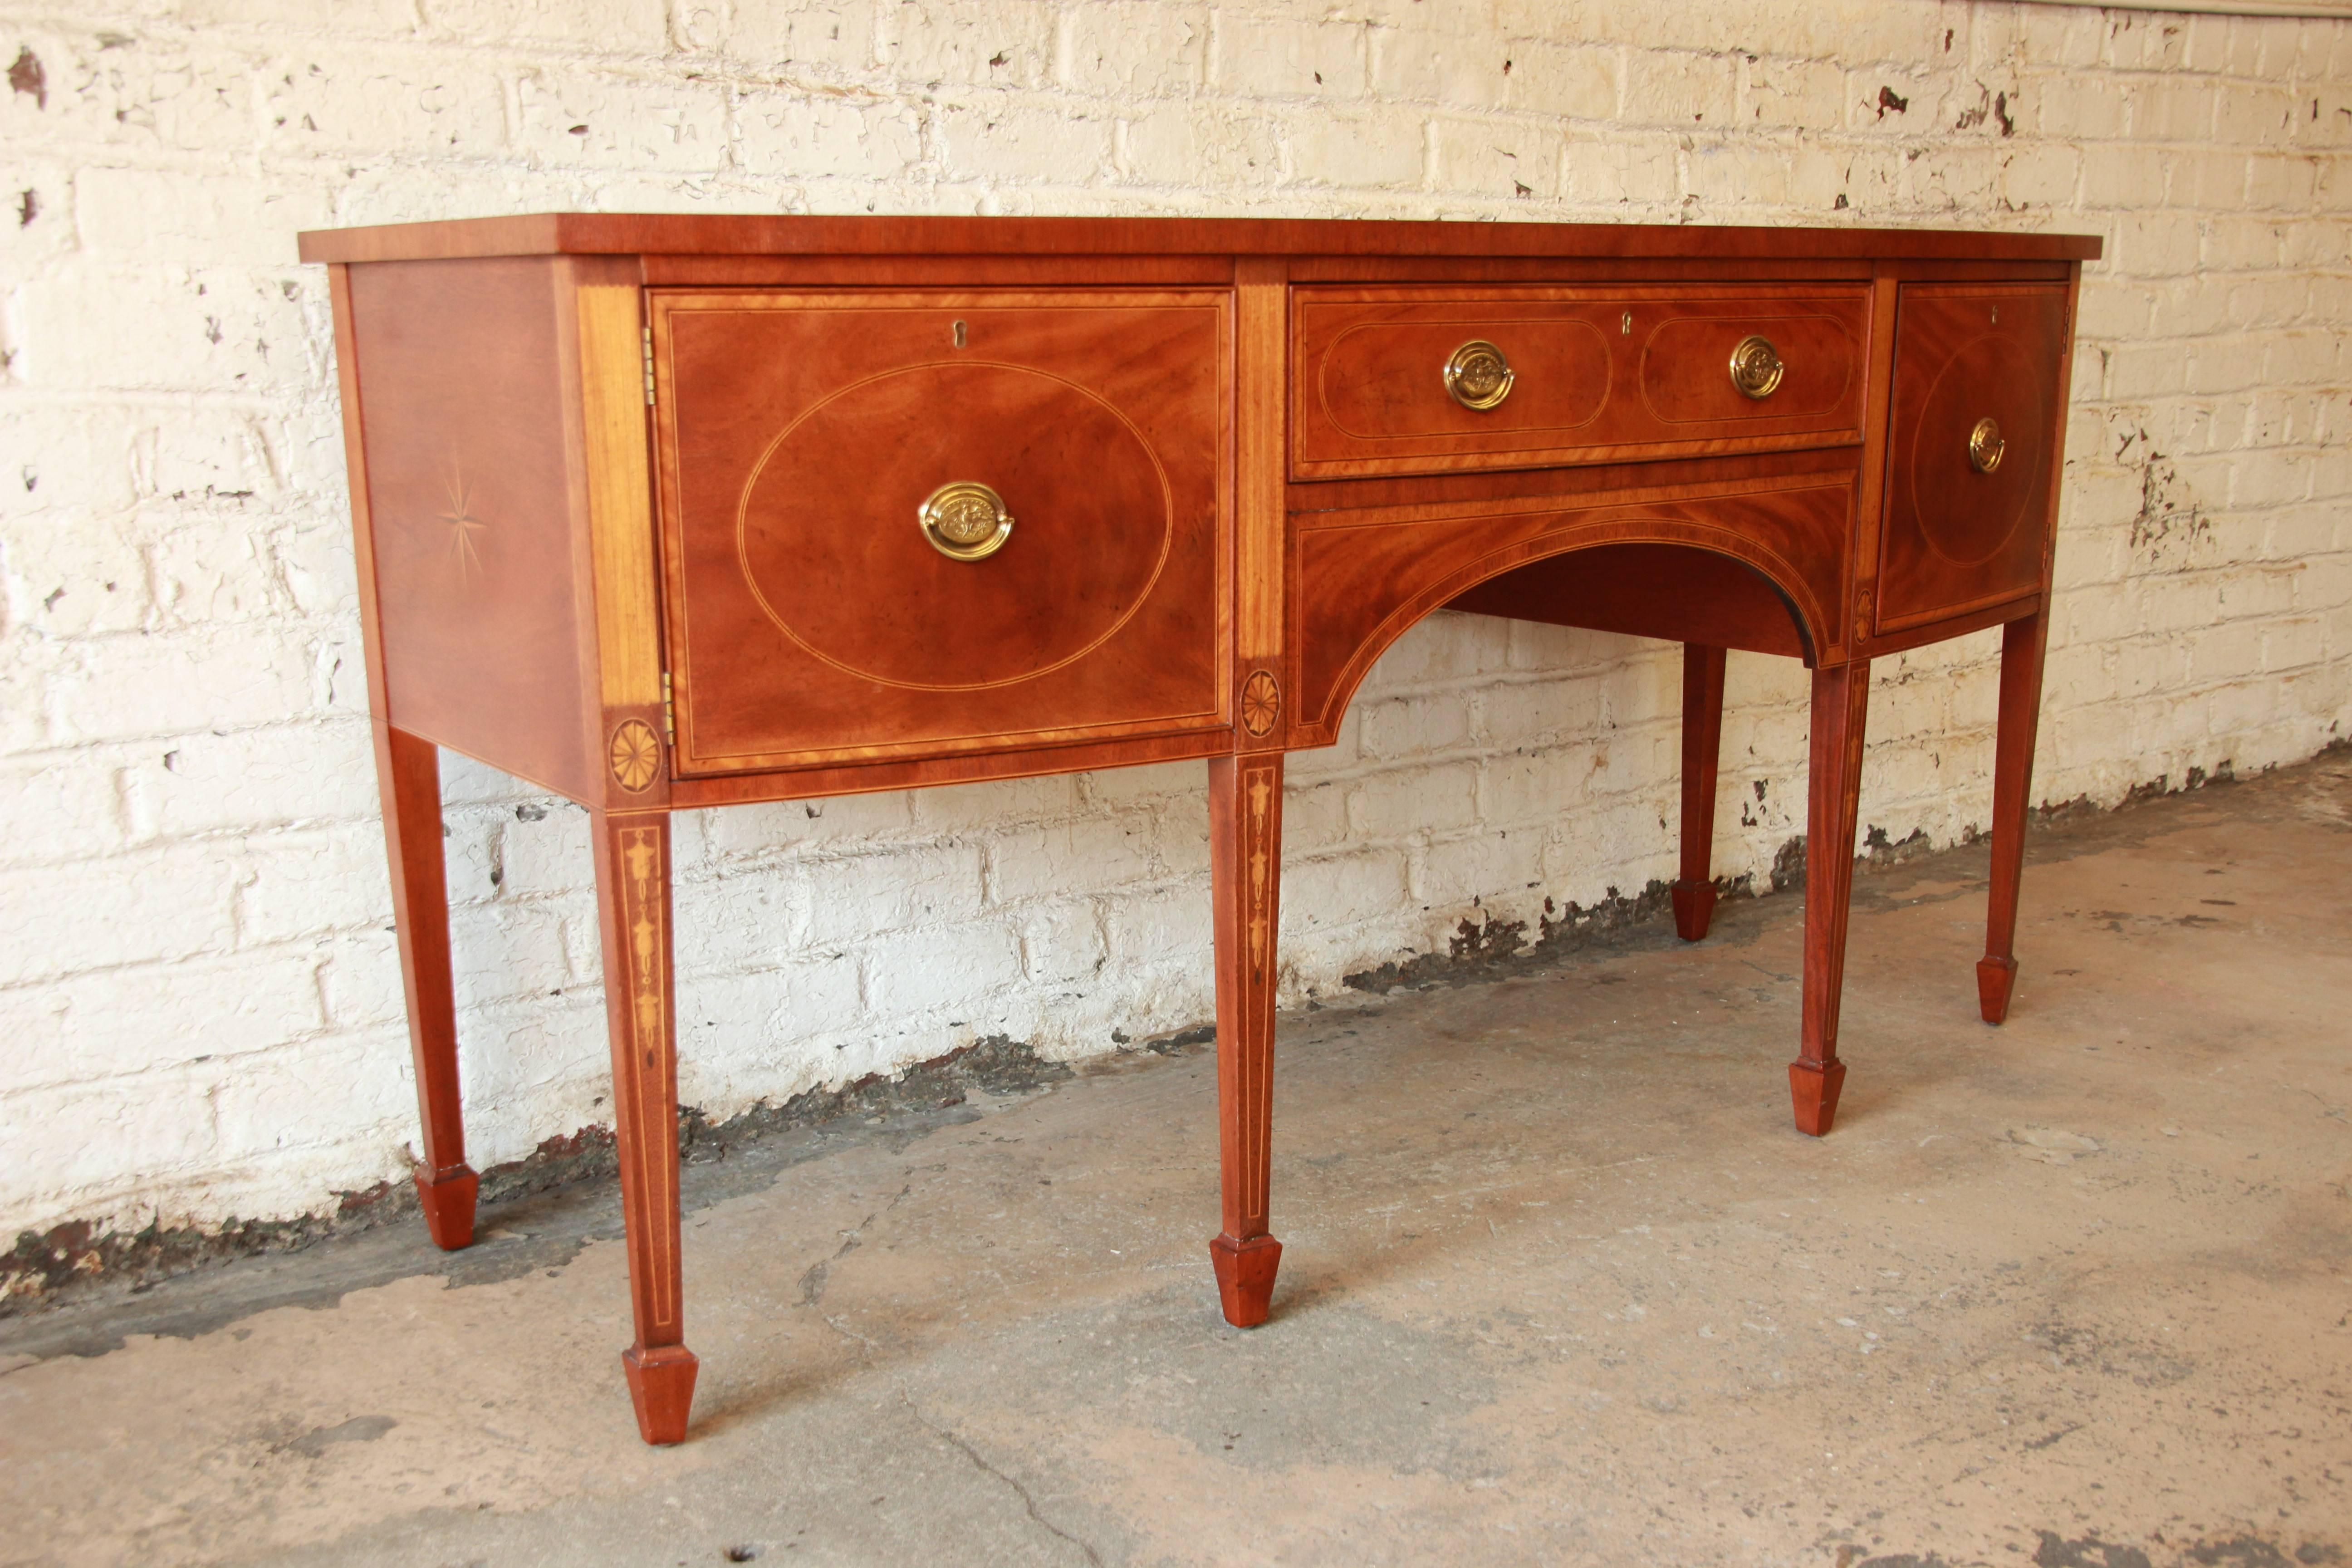 A stunning inlaid mahogany American sideboard buffet from the Historic Williamsburg line by Baker Furniture. This sideboard features intricate inlaid details and brass pulls with eagle design. The top middle drawer is felt-lined for silverware. The